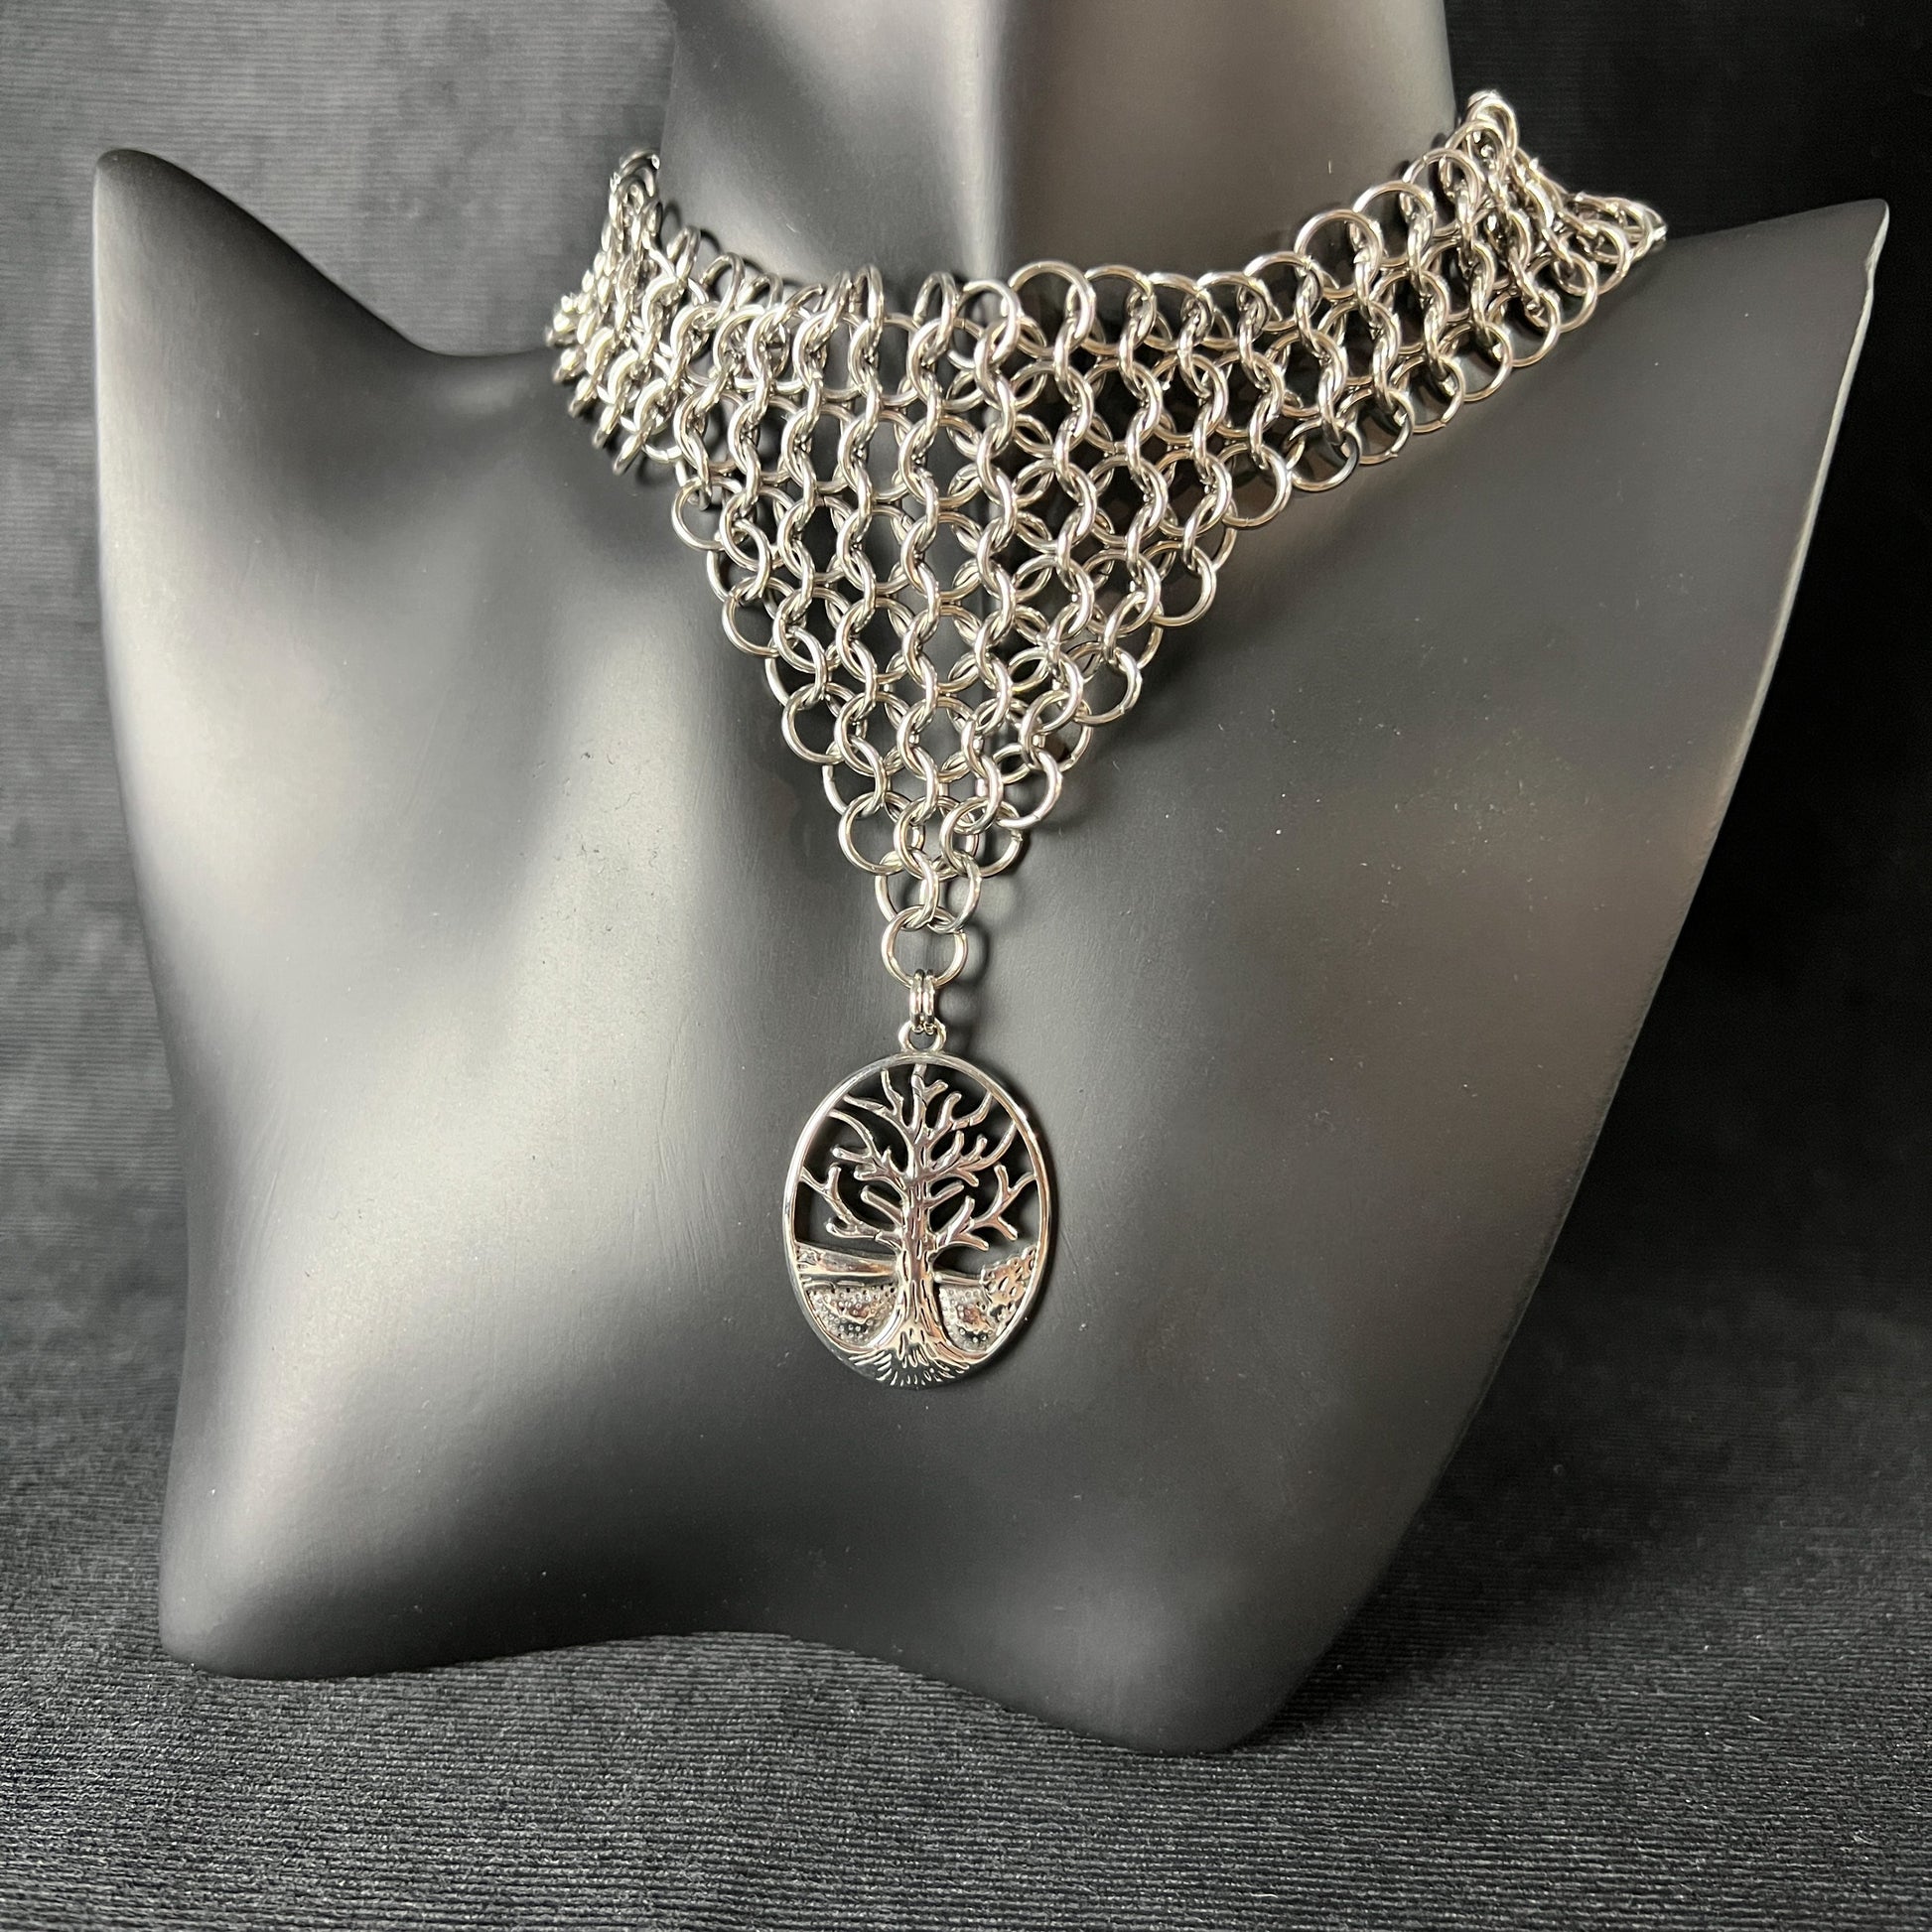 Tree pendant chainmail choker made of stainless steel European 4 in 1 chainmaille necklace gothic jewelry